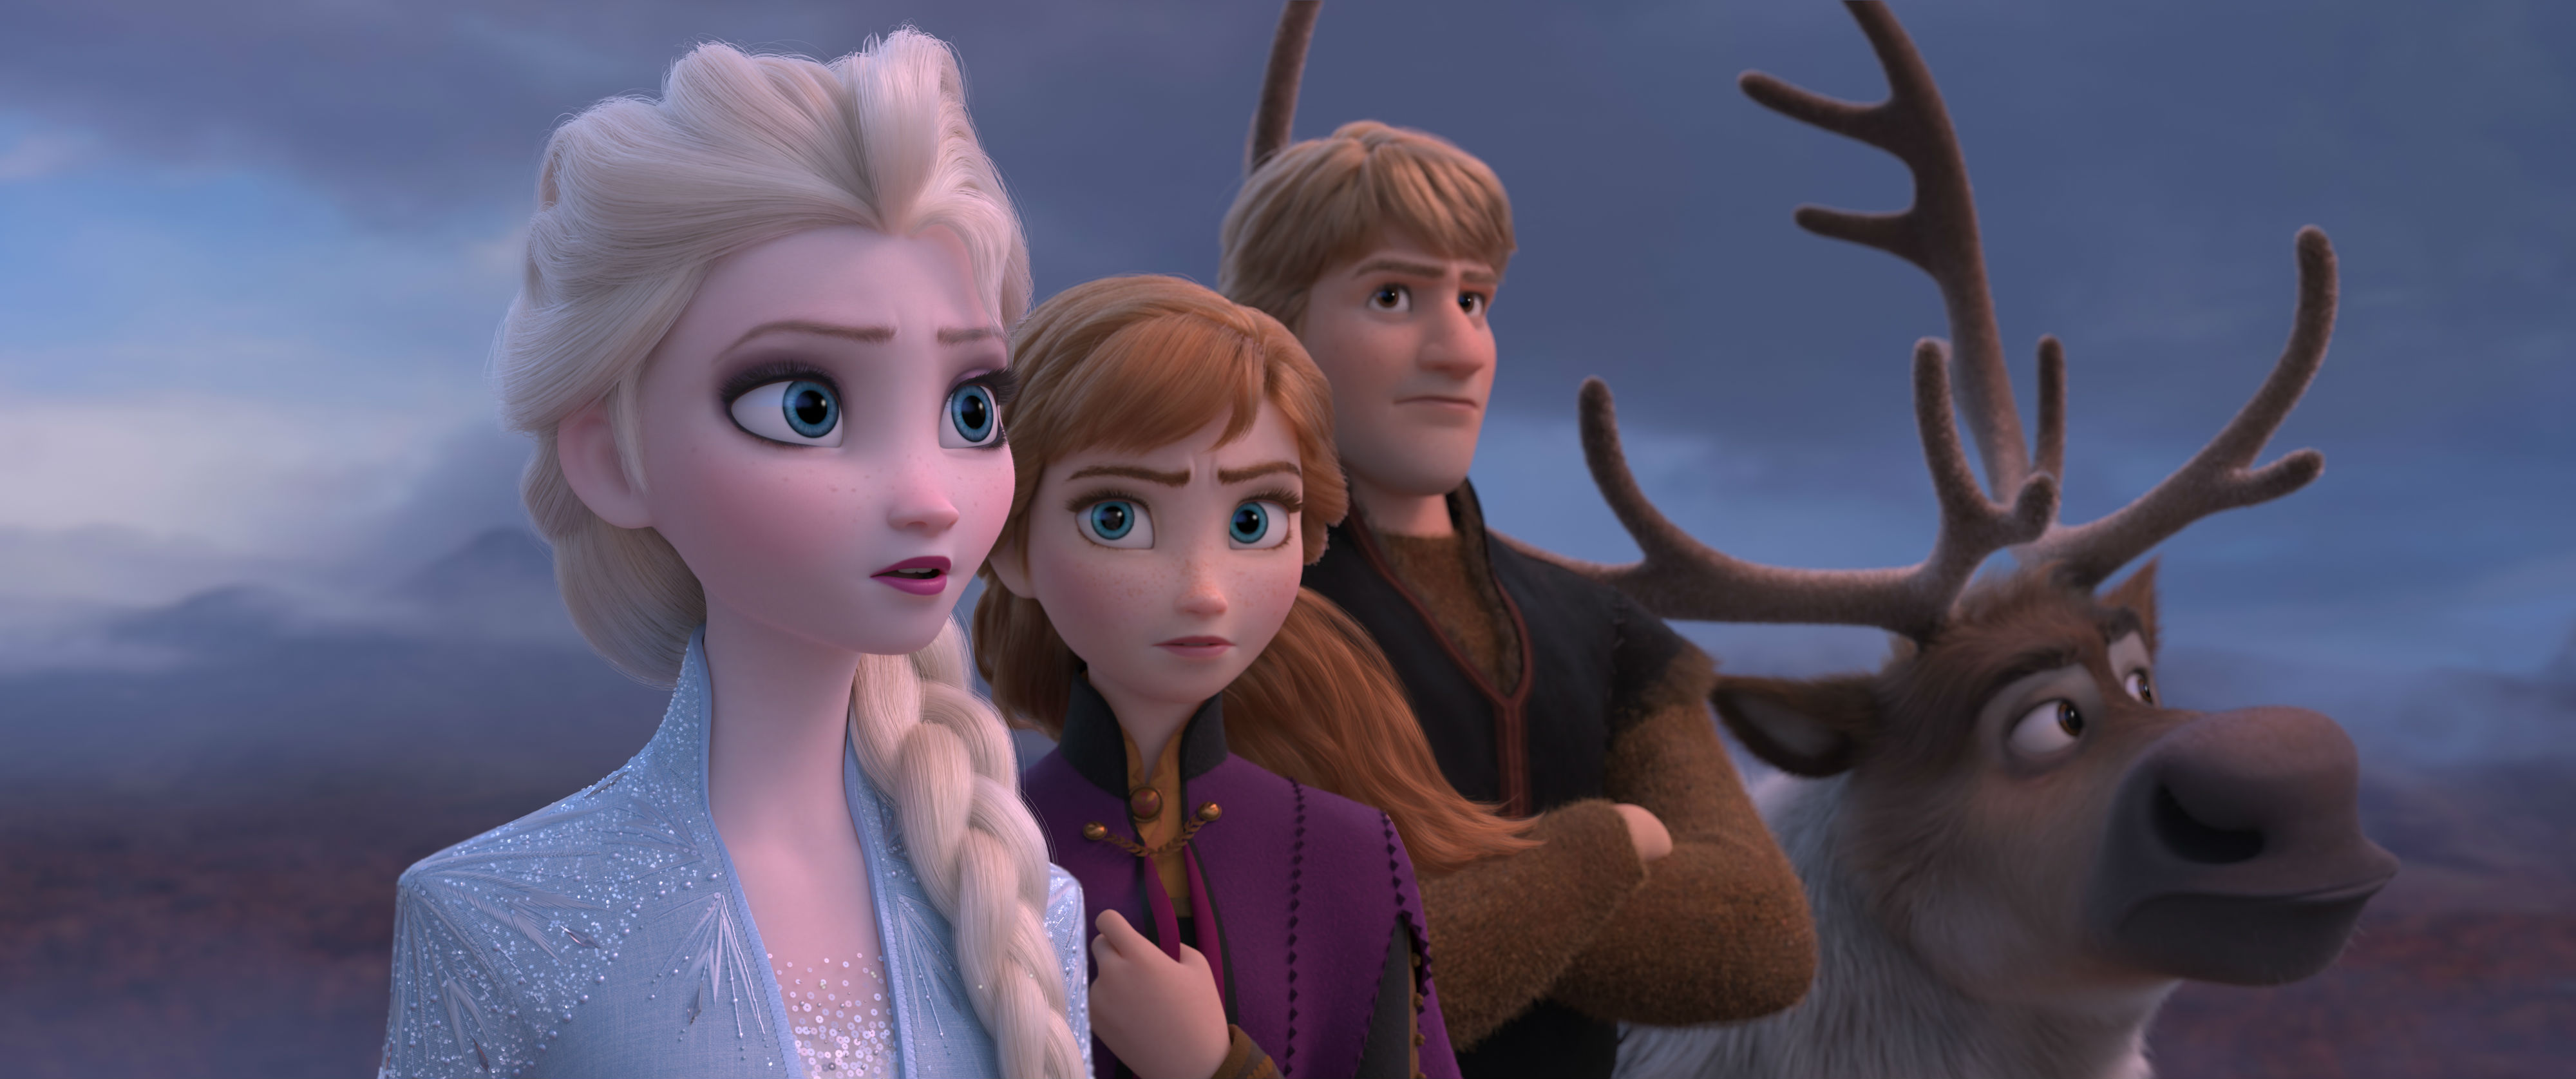 Frozen 2: Fall Mirrors Winter In Gorgeous New International Poster